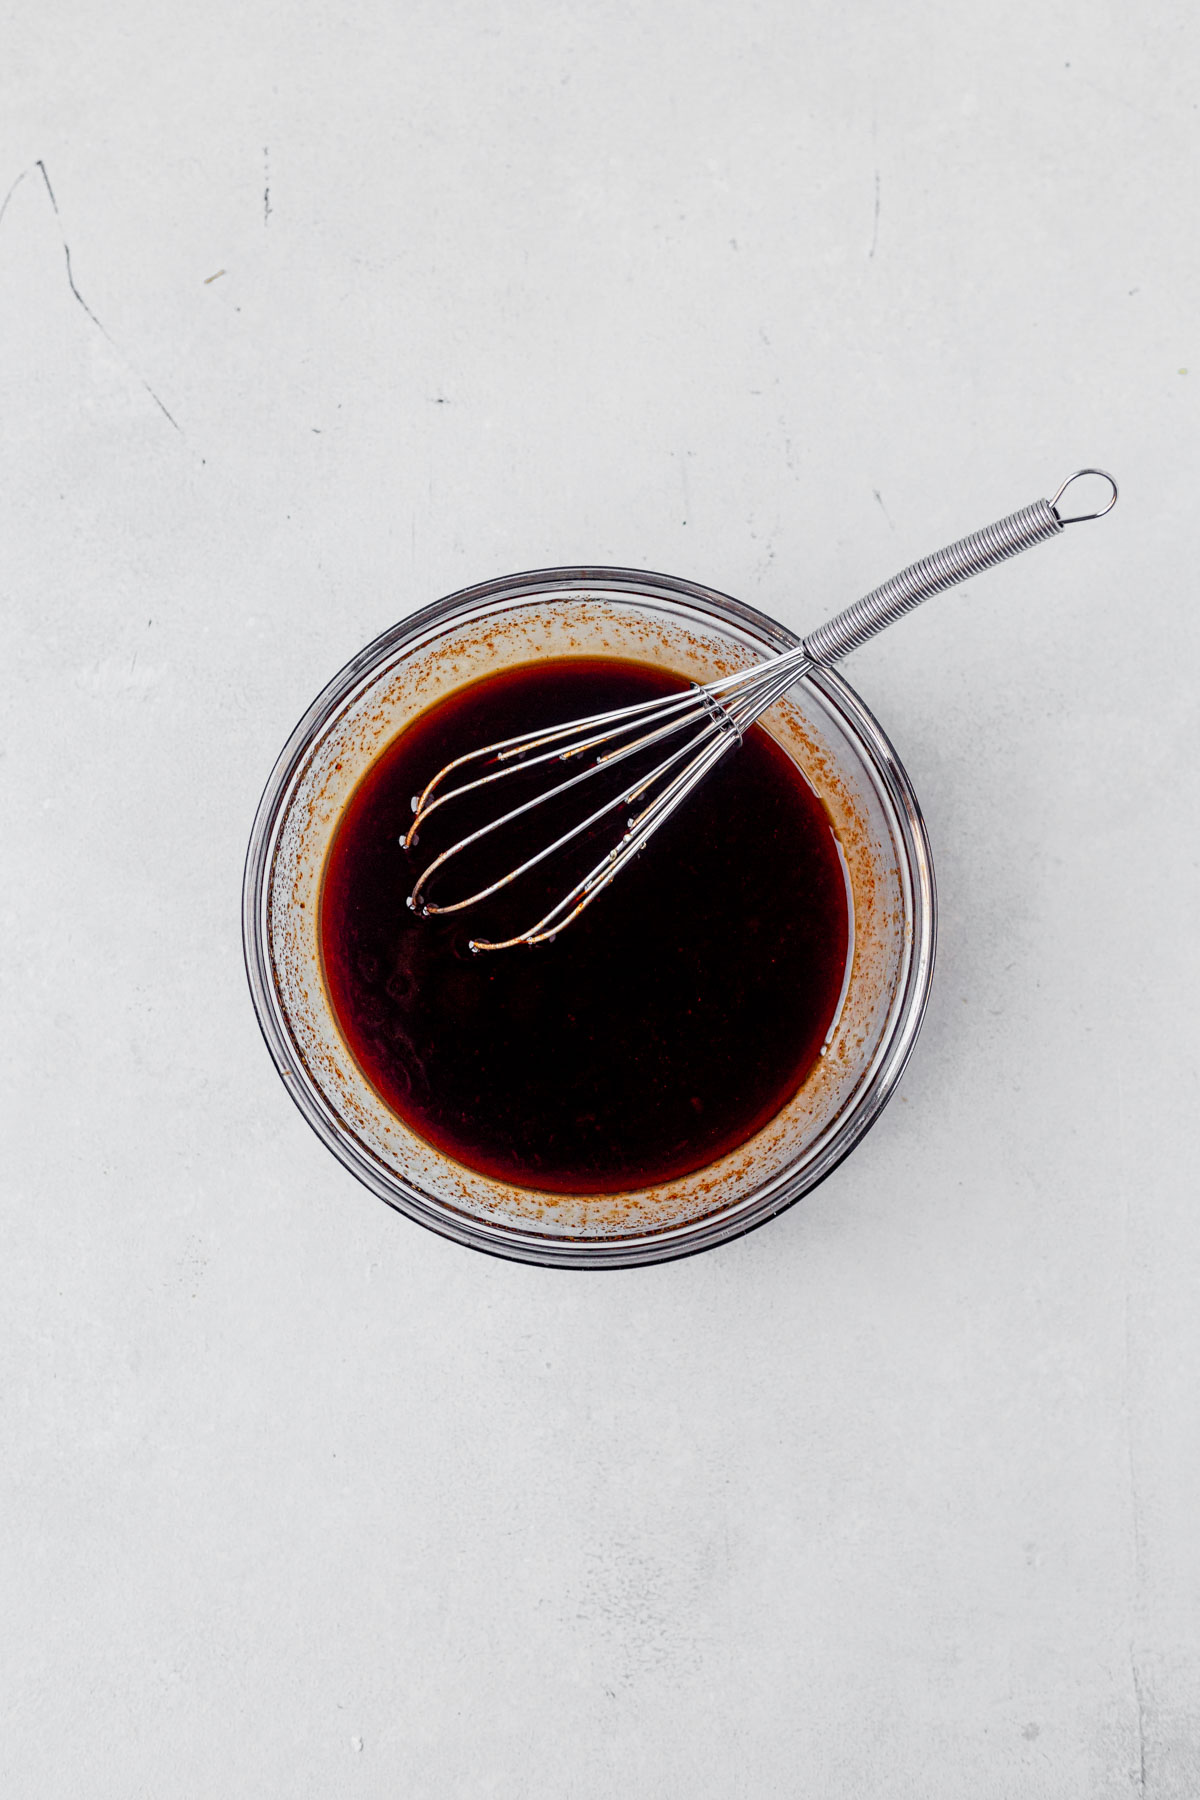 gochujang sauce with a whisk in a small bowl